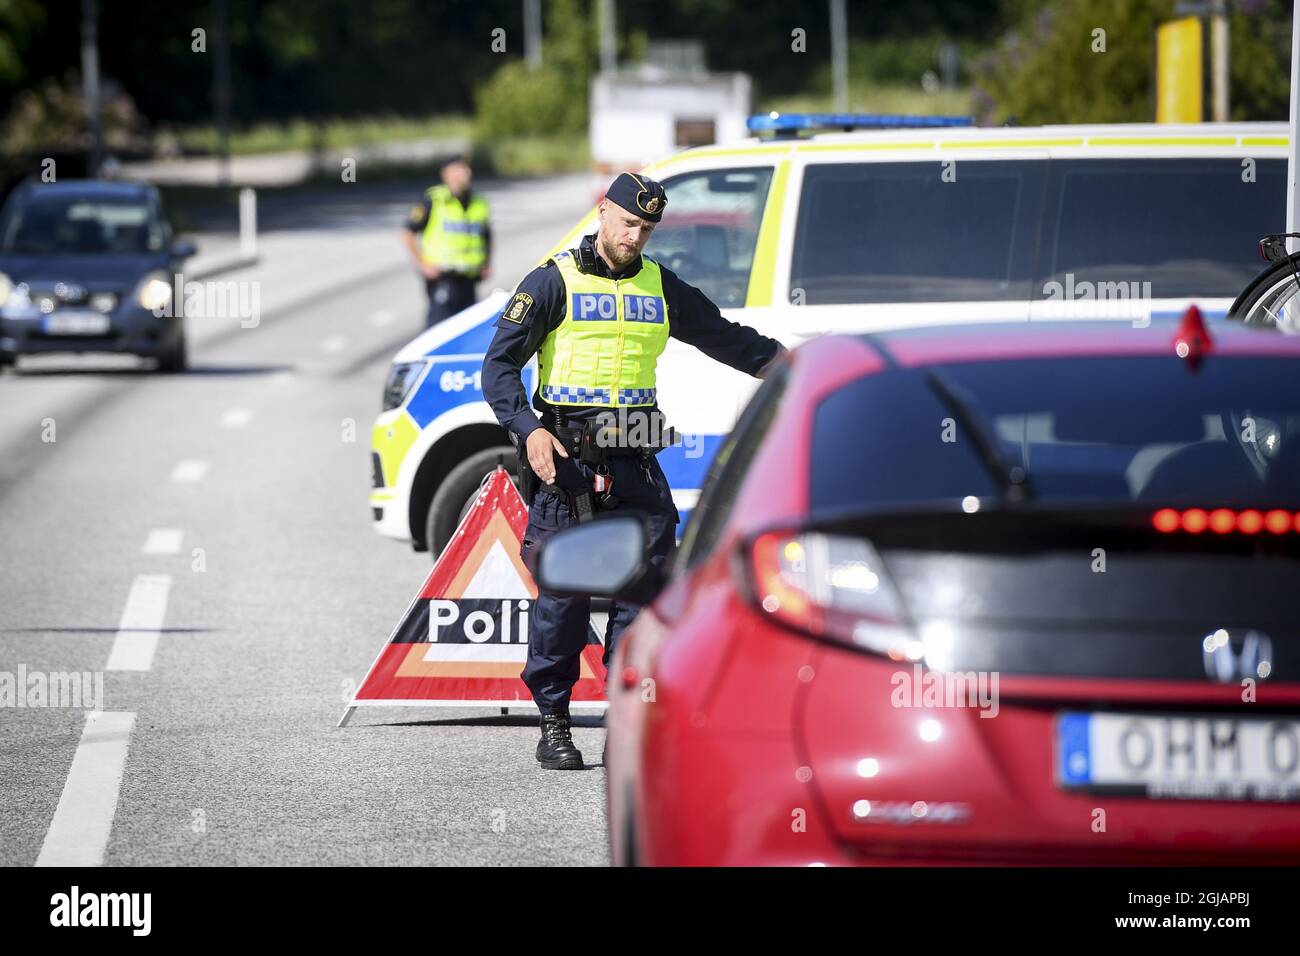 NORJE 20170607 Armed police officers at the first day of the 'Sweden Rock Festival' in Norje Sweden on Wednesday. Due to recent terror attacks the security is tighter this year Foto: Fredrik Sandberg / TT / kod 10080 swedenrock2017  Stock Photo